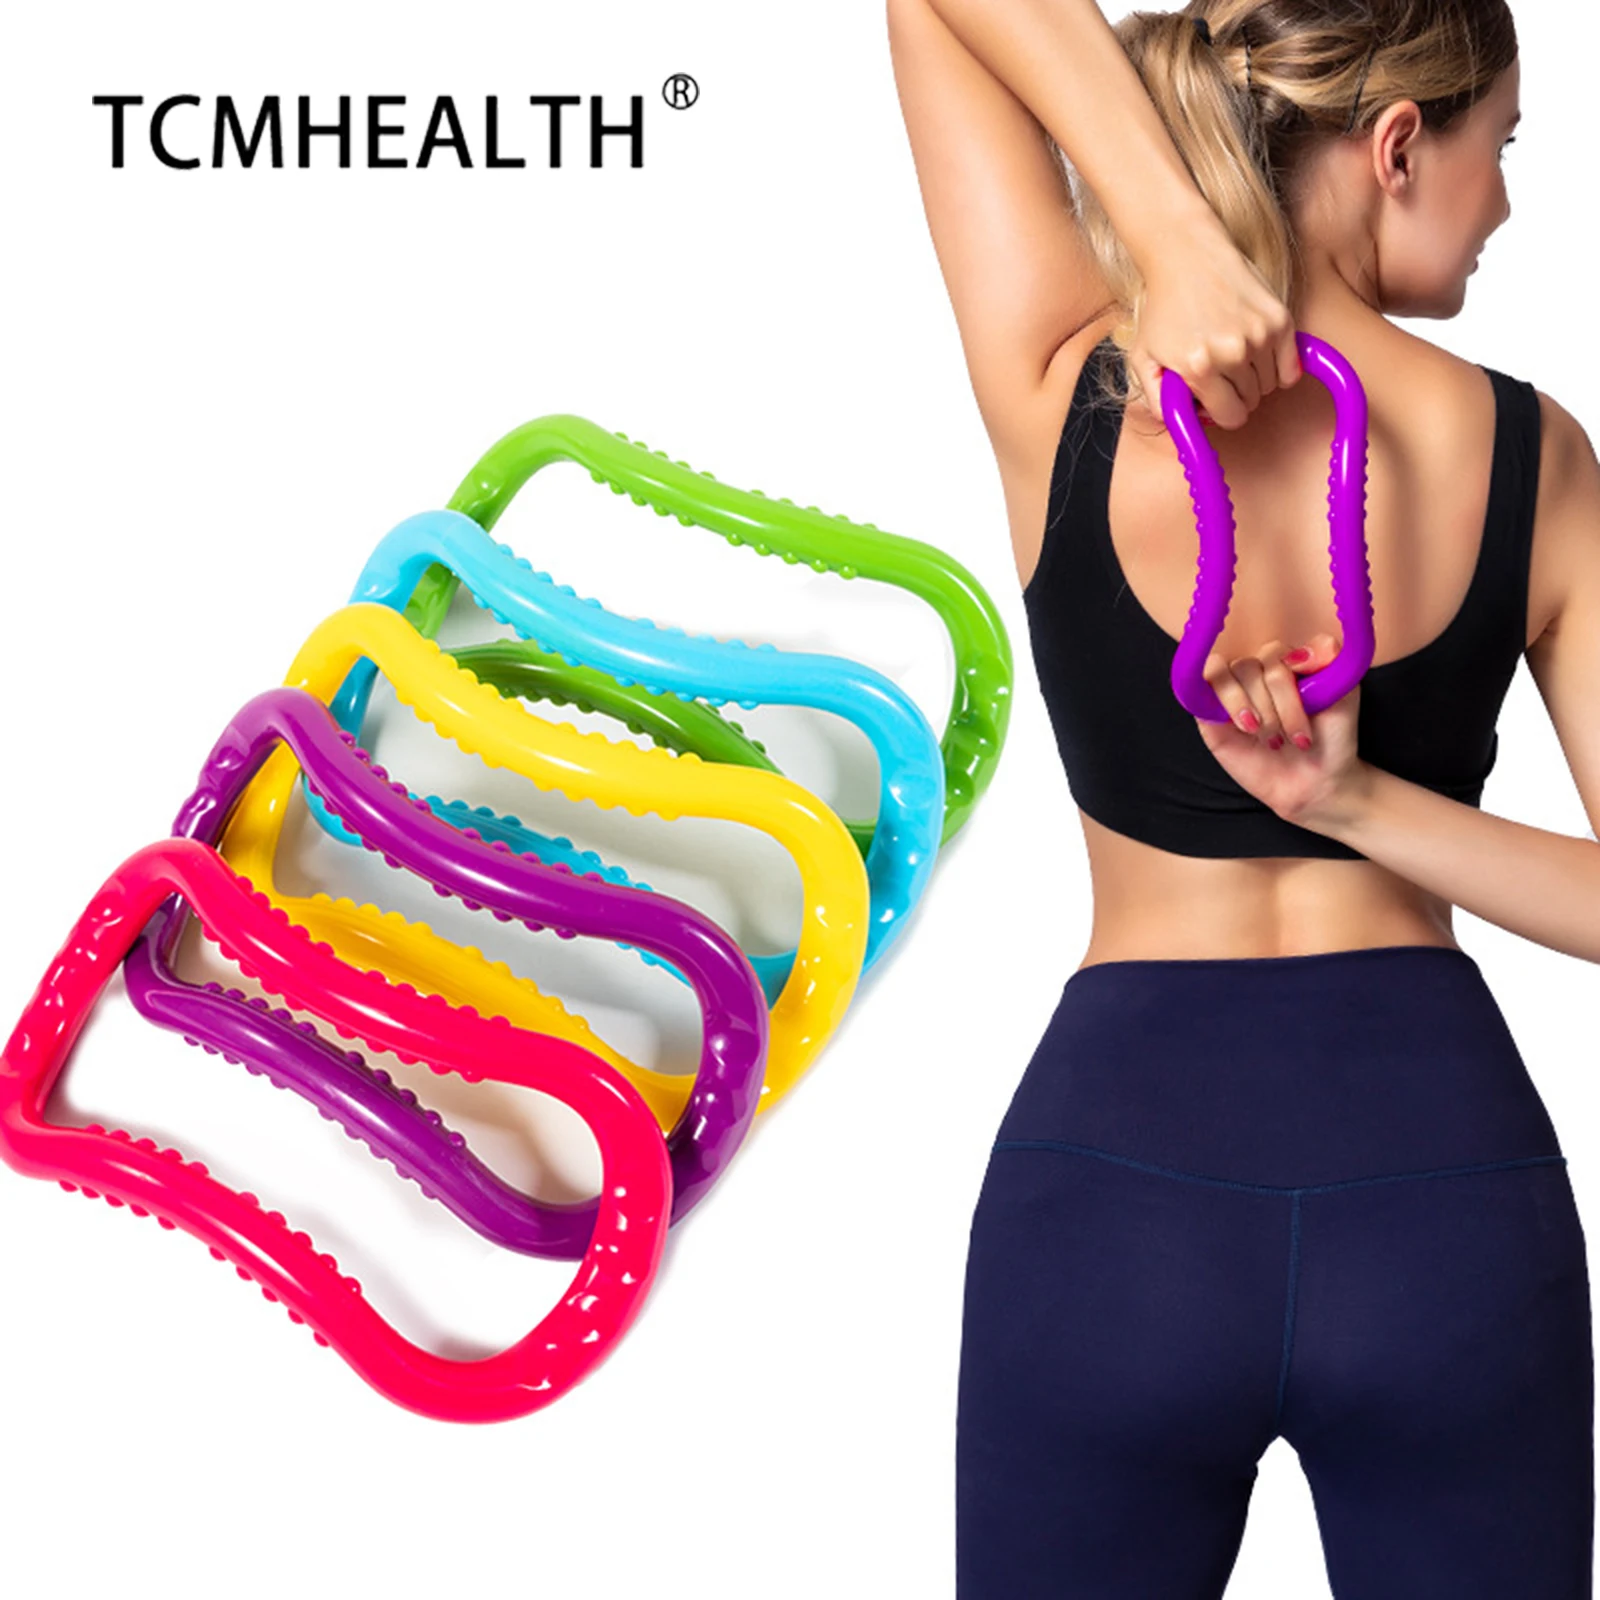 

TCMHEALTH Yoga Circle Pilates Stretch Ring Home Women Fitness Equipment Fascia Massage Body Workout Exercise Resistance Support